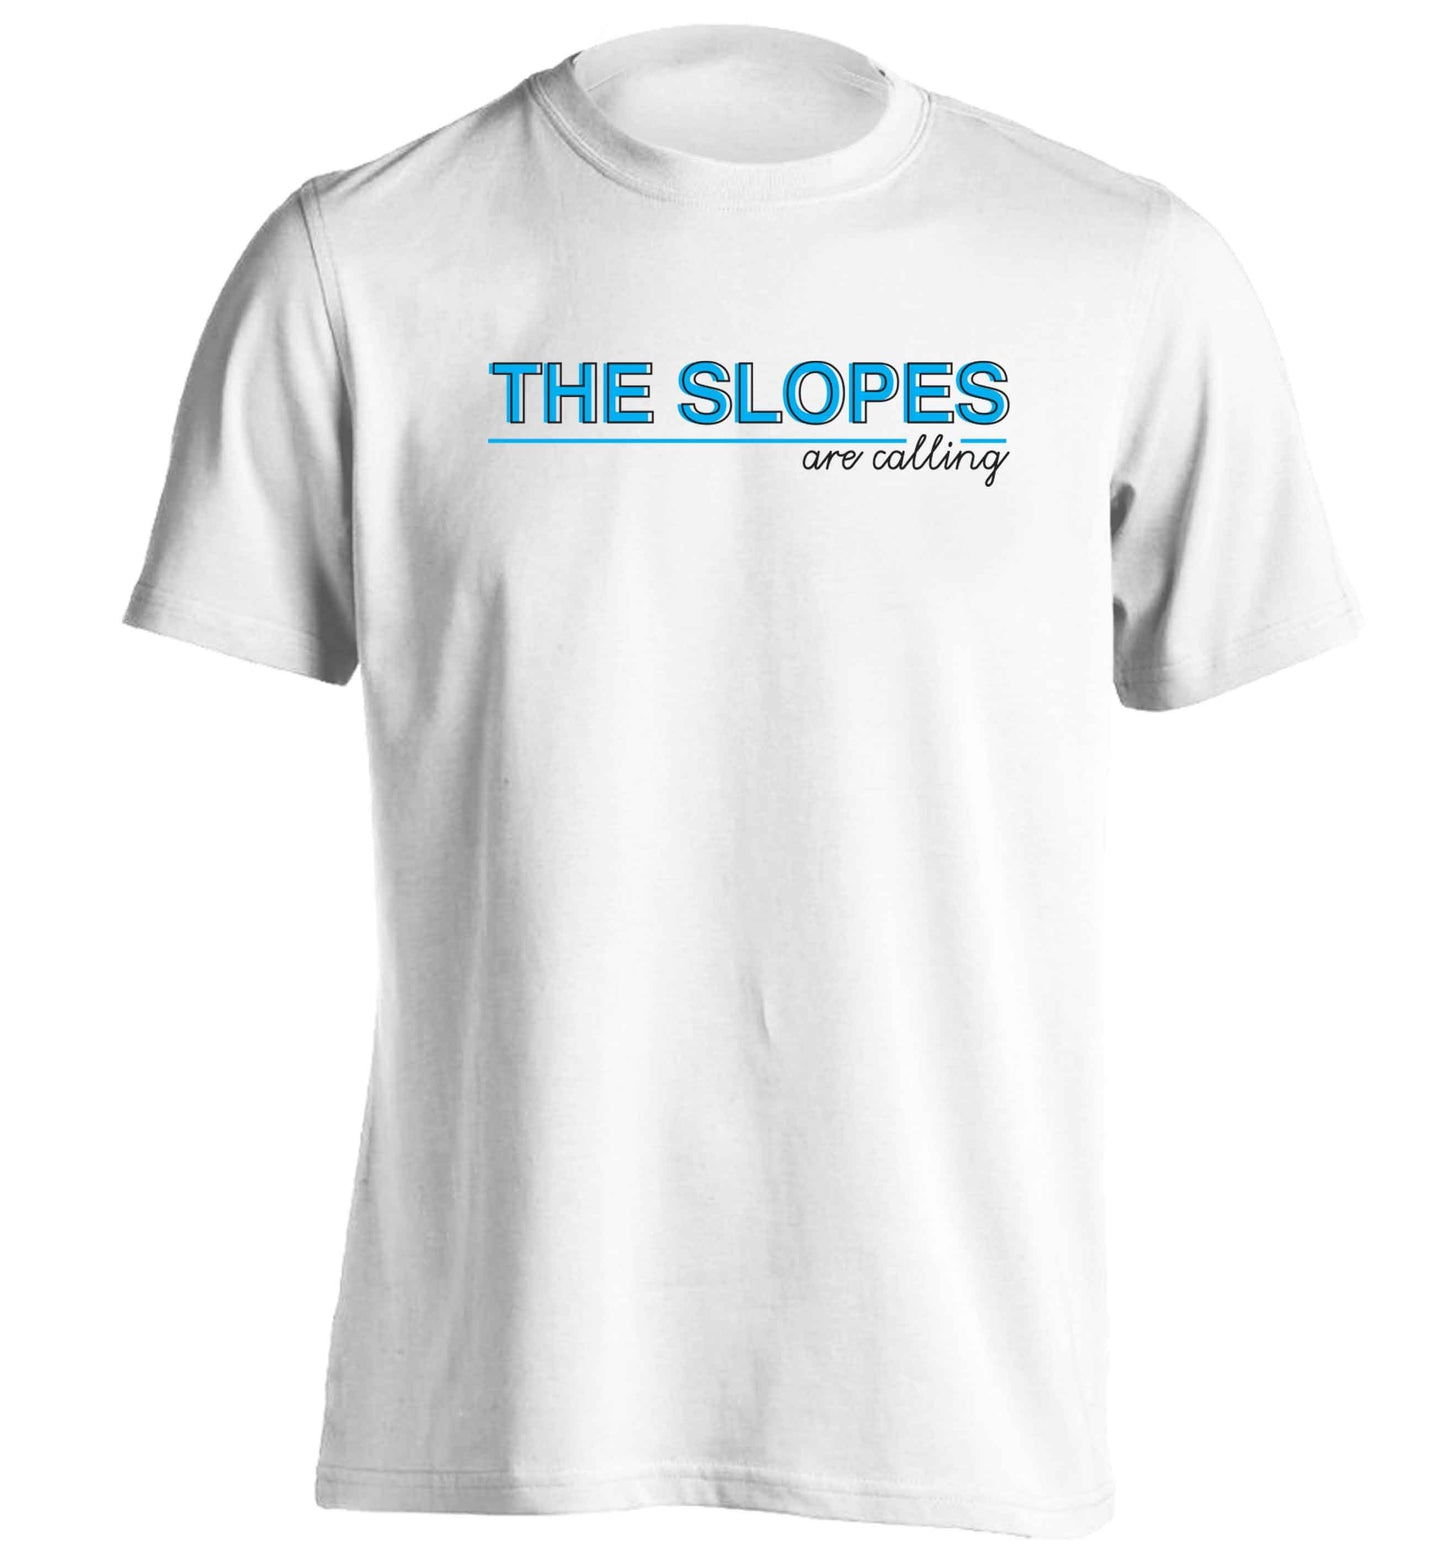 The slopes are calling adults unisex white Tshirt 2XL